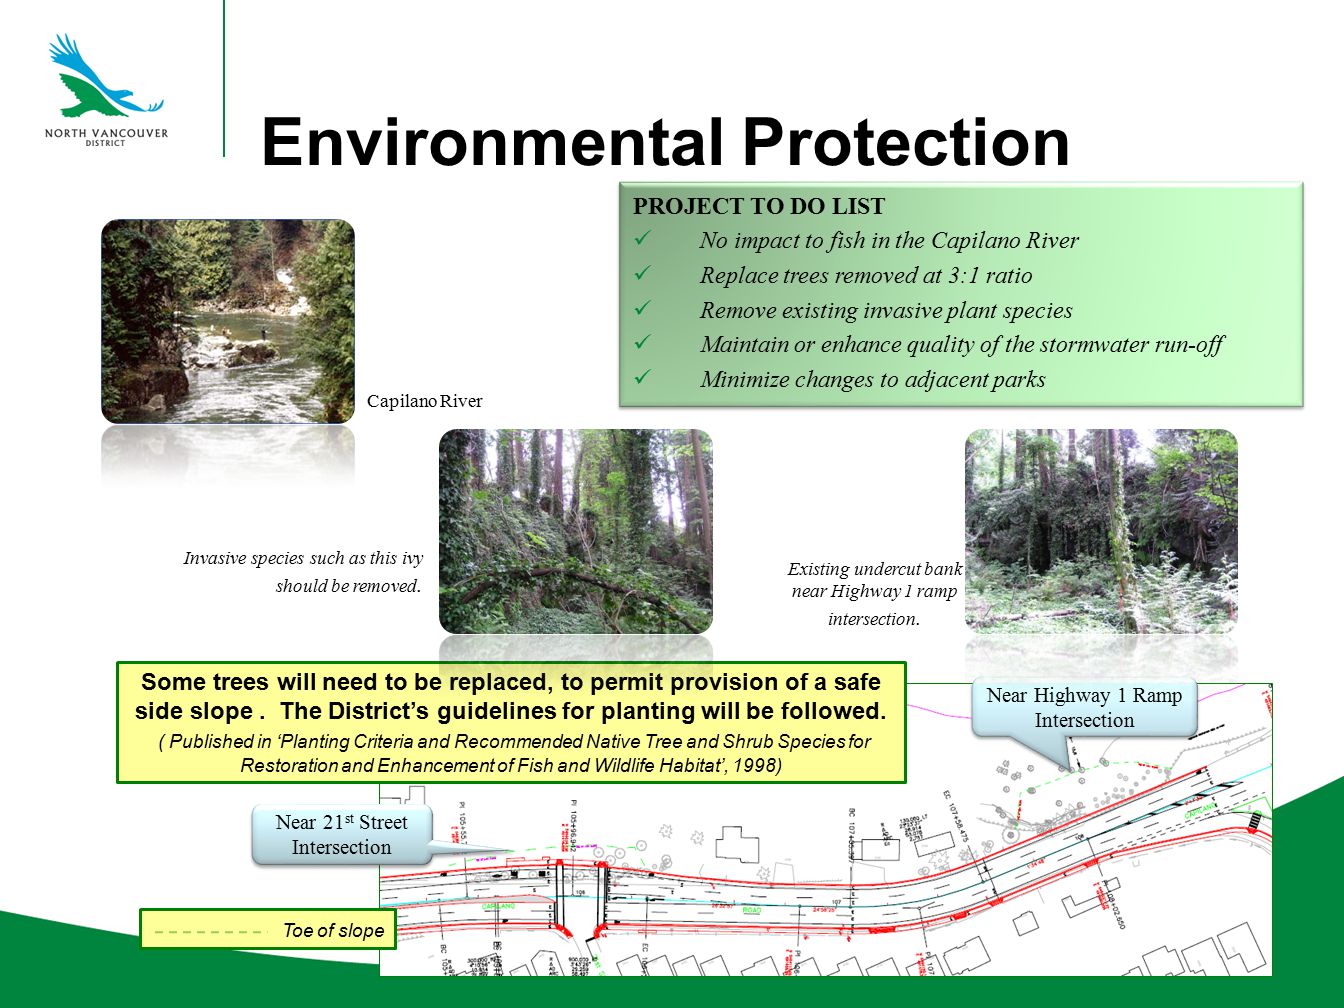 Environmental Protection PROJECT TO DO LIST No impact to fish in the Capilano River Replace trees removed at 3:1 ratio Remove existing invasive plant species Maintain or enhance quality of the stormwater run-off Minimize changes to adjacent parks PROJECT TO DO LIST No impact to fish in the Capilano River Replace trees removed at 3:1 ratio Remove existing invasive plant species Maintain or enhance quality of the stormwater run-off Minimize changes to adjacent parks Capilano River Near 21 st Street Intersection Near Highway 1 Ramp Intersection Some trees will need to be replaced, to permit provision of a safe side slope.